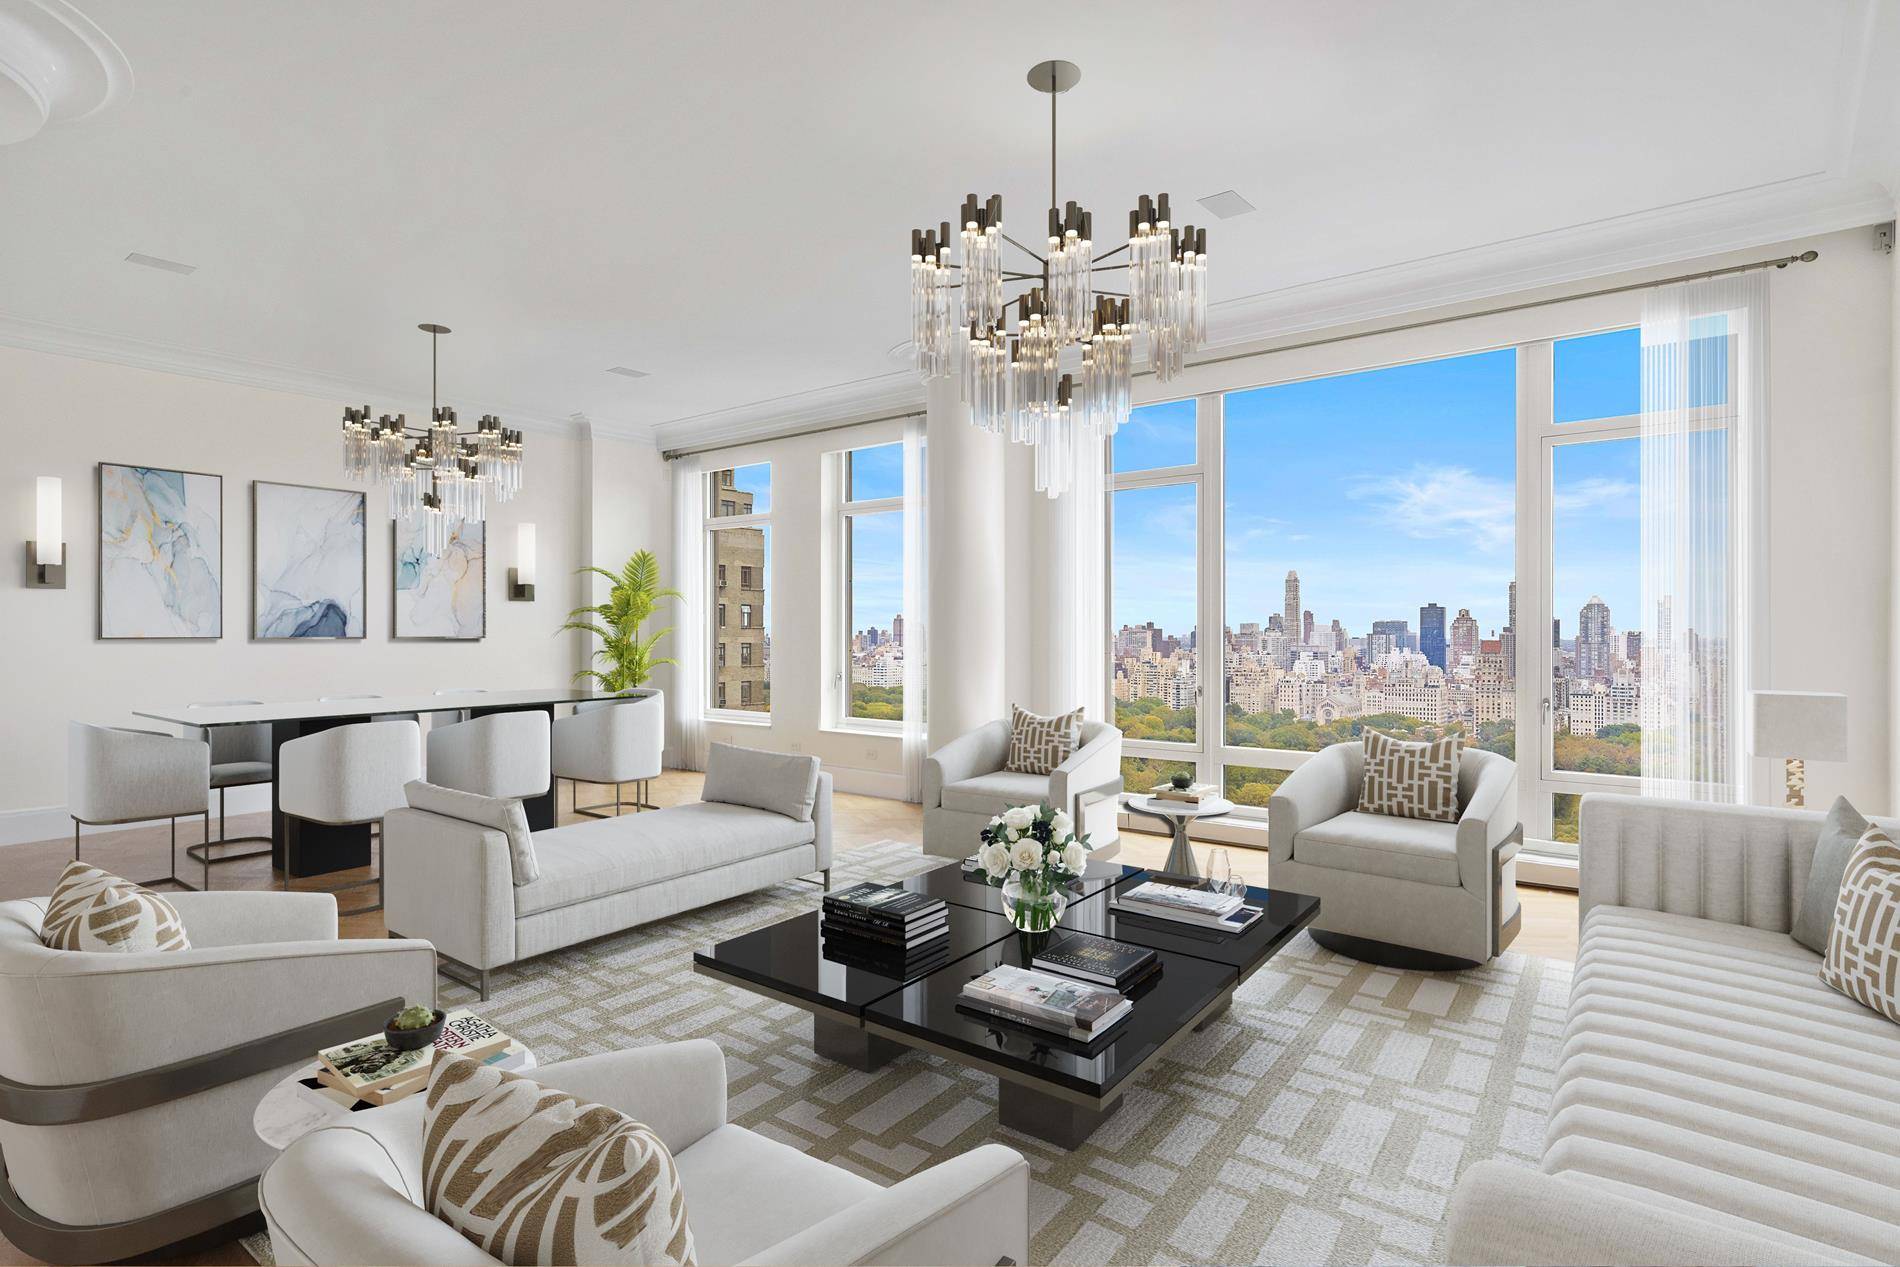 Spectacular Condominium home in one of Manhattan s most sought after buildings.